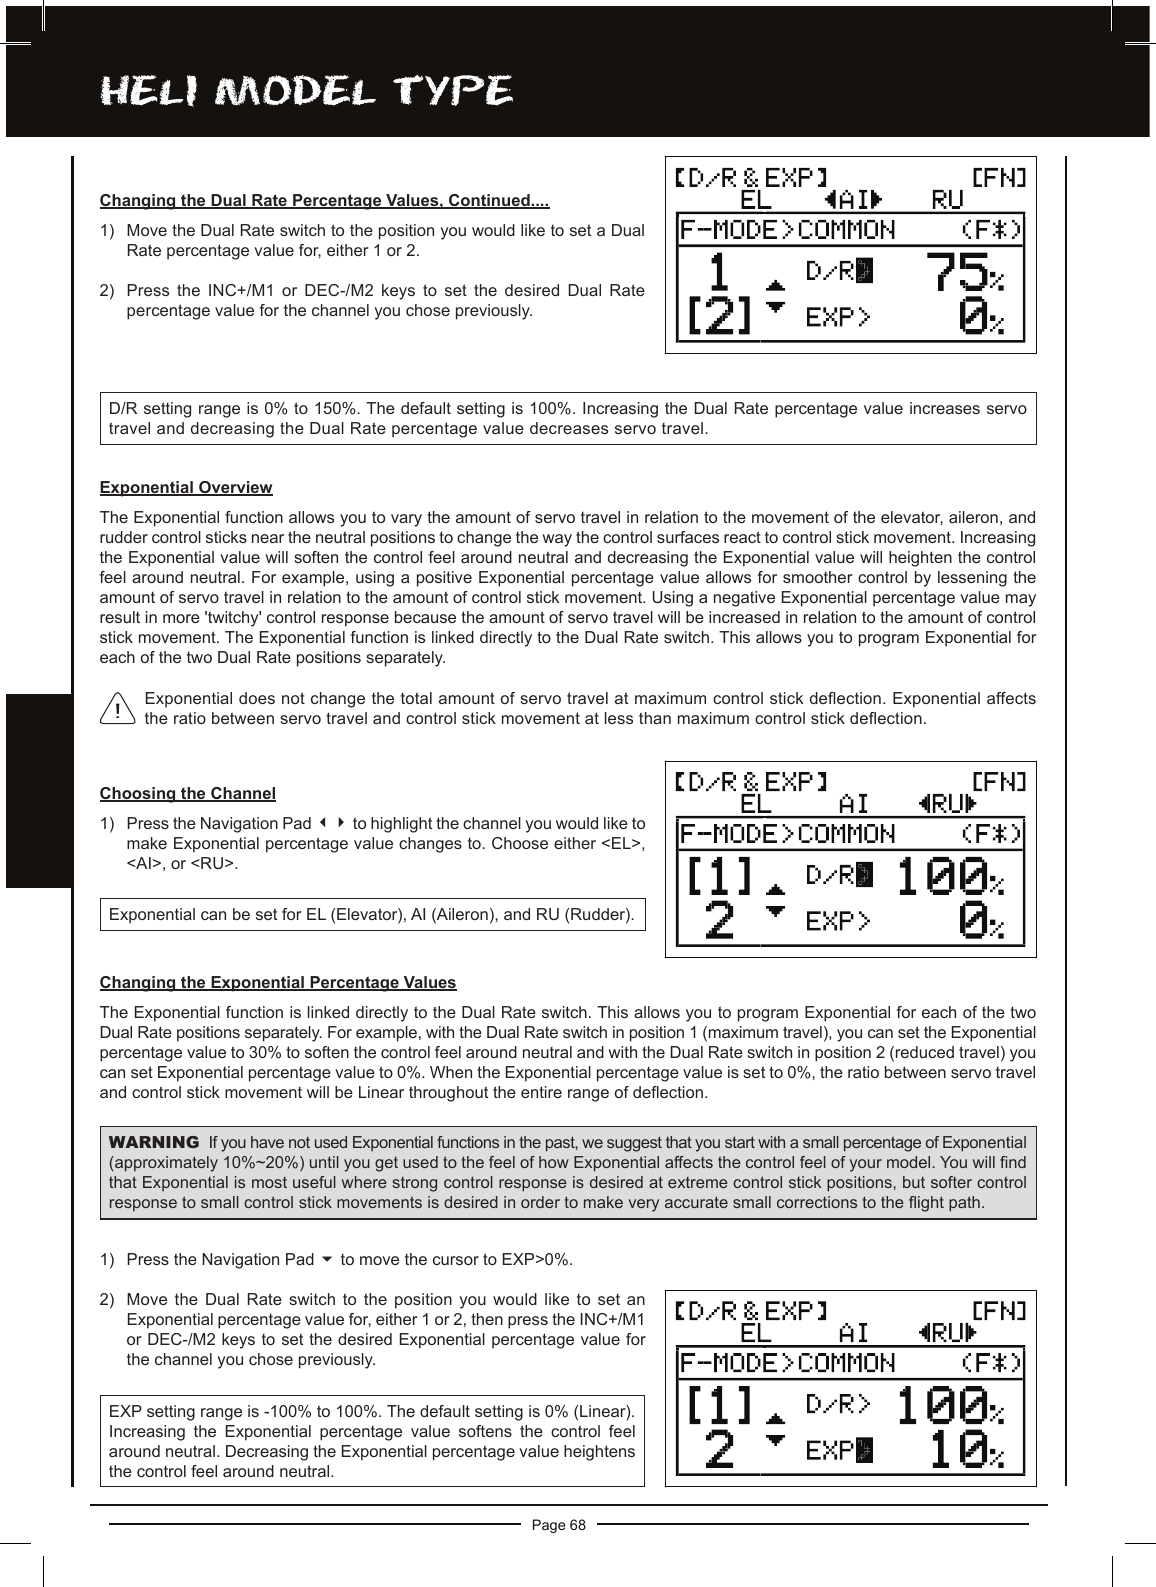 Page 68hELi MODEL TyPEChoosing the Channel1) Press the Navigation Pad 34 to highlight the channel you would like to make Exponential percentage value changes to. Choose either &lt;EL&gt;, &lt;AI&gt;, or &lt;RU&gt;.Exponential can be set for EL (Elevator), AI (Aileron), and RU (Rudder).Changing the Exponential Percentage ValuesThe Exponential function is linked directly to the Dual Rate switch. This allows you to program Exponential for each of the two Dual Rate positions separately. For example, with the Dual Rate switch in position 1 (maximum travel), you can set the Exponential percentage value to 30% to soften the control feel around neutral and with the Dual Rate switch in position 2 (reduced travel) you can set Exponential percentage value to 0%. When the Exponential percentage value is set to 0%, the ratio between servo travel and control stick movement will be Linear throughout the entire range of deection.WARNING If you have not used Exponential functions in the past, we suggest that you start with a small percentage of Exponential (approximately 10%~20%) until you get used to the feel of how Exponential affects the control feel of your model. You will nd that Exponential is most useful where strong control response is desired at extreme control stick positions, but softer control response to small control stick movements is desired in order to make very accurate small corrections to the ight path.1) Press the Navigation Pad 6 to move the cursor to EXP&gt;0%.2) Move the Dual Rate switch to the position you would like to set an Exponential percentage value for, either 1 or 2, then press the INC+/M1 or DEC-/M2 keys to set the desired Exponential percentage value for the channel you chose previously.EXP setting range is -100% to 100%. The default setting is 0% (Linear). Increasing  the  Exponential  percentage  value  softens  the  control  feel around neutral. Decreasing the Exponential percentage value heightens the control feel around neutral.D/R setting range is 0% to 150%. The default setting is 100%. Increasing the Dual Rate percentage value increases servo travel and decreasing the Dual Rate percentage value decreases servo travel.Changing the Dual Rate Percentage Values, Continued....1) Move the Dual Rate switch to the position you would like to set a Dual Rate percentage value for, either 1 or 2. 2) Press the INC+/M1 or DEC-/M2 keys to set the desired Dual Rate percentage value for the channel you chose previously.Exponential OverviewThe Exponential function allows you to vary the amount of servo travel in relation to the movement of the elevator, aileron, and rudder control sticks near the neutral positions to change the way the control surfaces react to control stick movement. Increasing the Exponential value will soften the control feel around neutral and decreasing the Exponential value will heighten the control feel around neutral. For example, using a positive Exponential percentage value allows for smoother control by lessening the amount of servo travel in relation to the amount of control stick movement. Using a negative Exponential percentage value may result in more &apos;twitchy&apos; control response because the amount of servo travel will be increased in relation to the amount of control stick movement. The Exponential function is linked directly to the Dual Rate switch. This allows you to program Exponential for each of the two Dual Rate positions separately.Exponential does not change the total amount of servo travel at maximum control stick deection. Exponential affects the ratio between servo travel and control stick movement at less than maximum control stick deection.